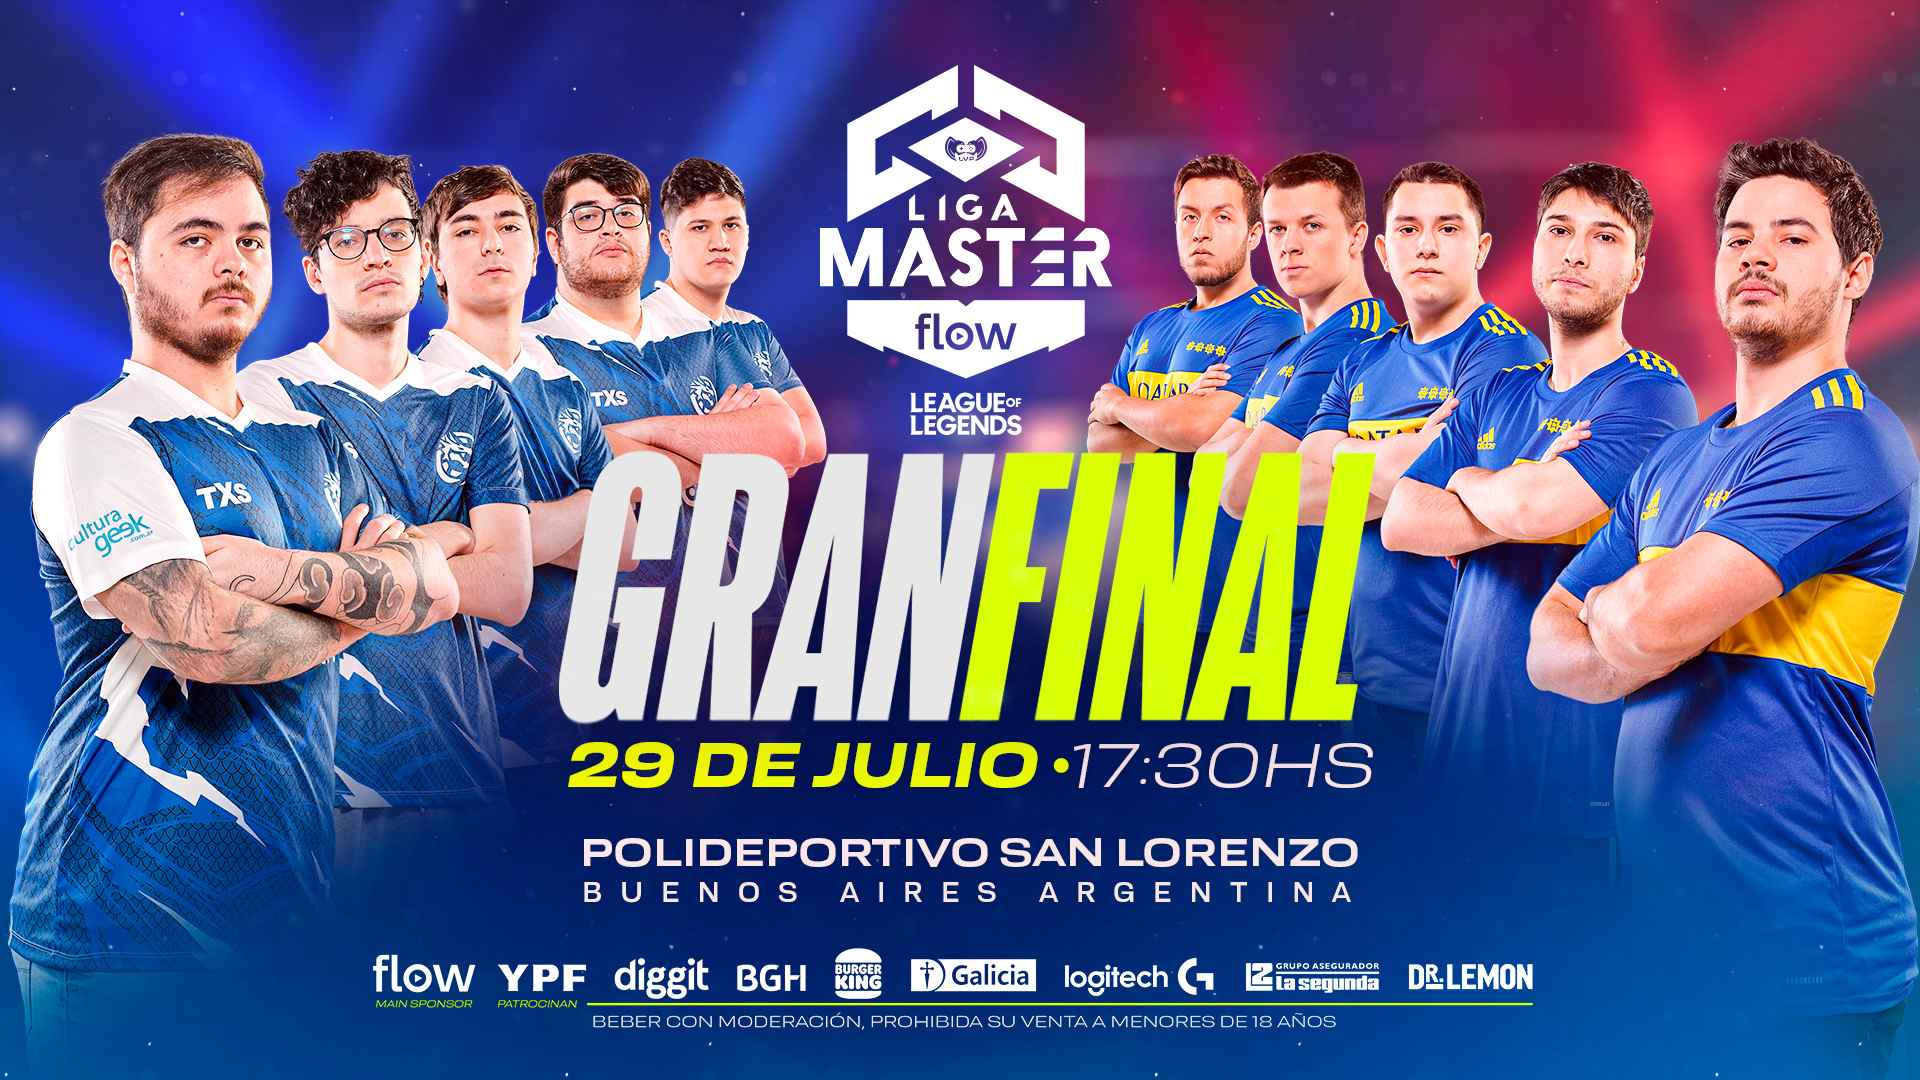 Sunblast (Boca Gaming) on ​​the Master Flow League final: "What matters to me is winning, not against which rival"